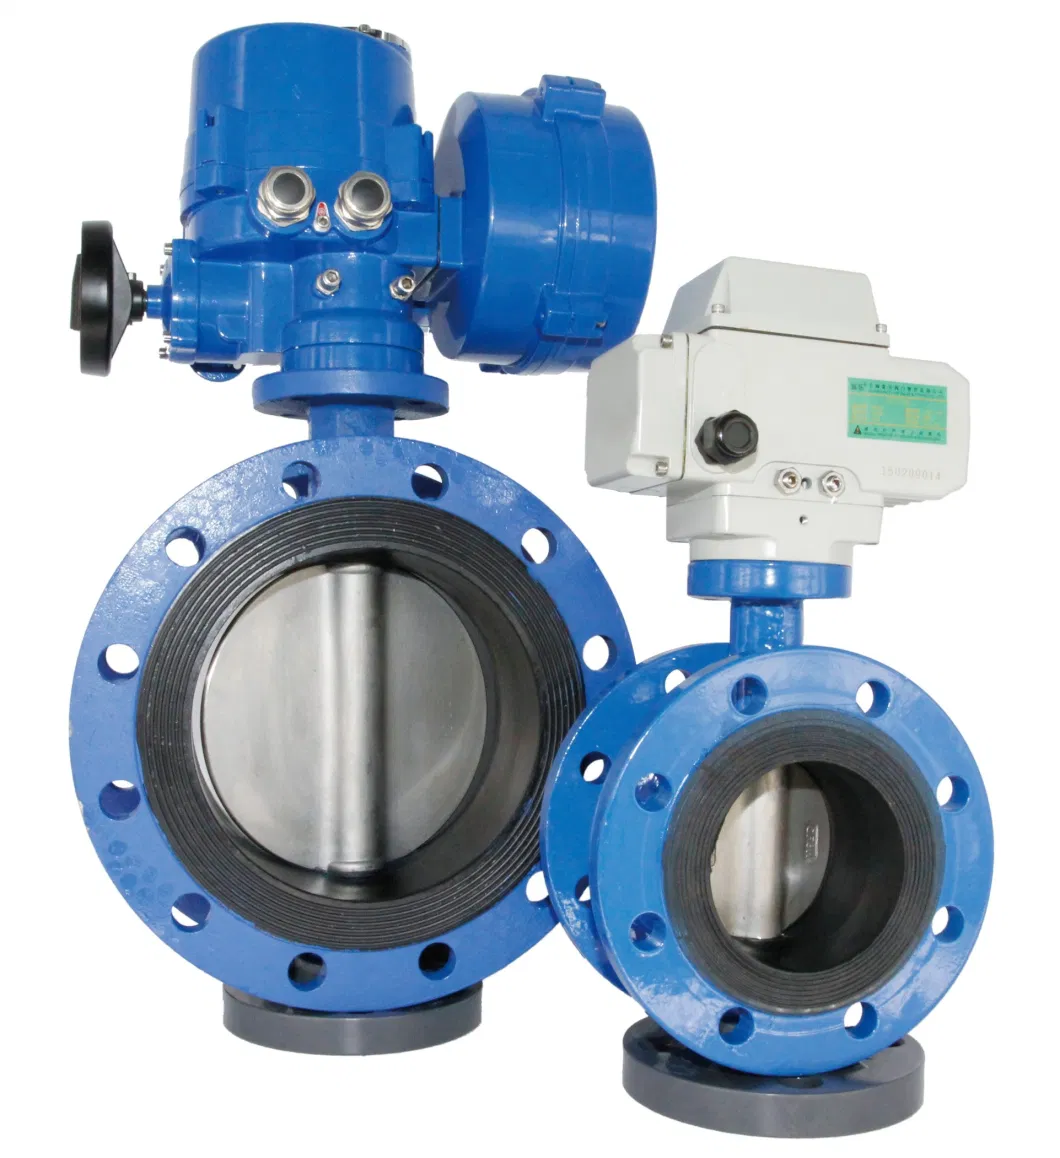 Gearbox/Pneumatic/Electric Operated Concentric Double Flange Butterfly Valve Concentric